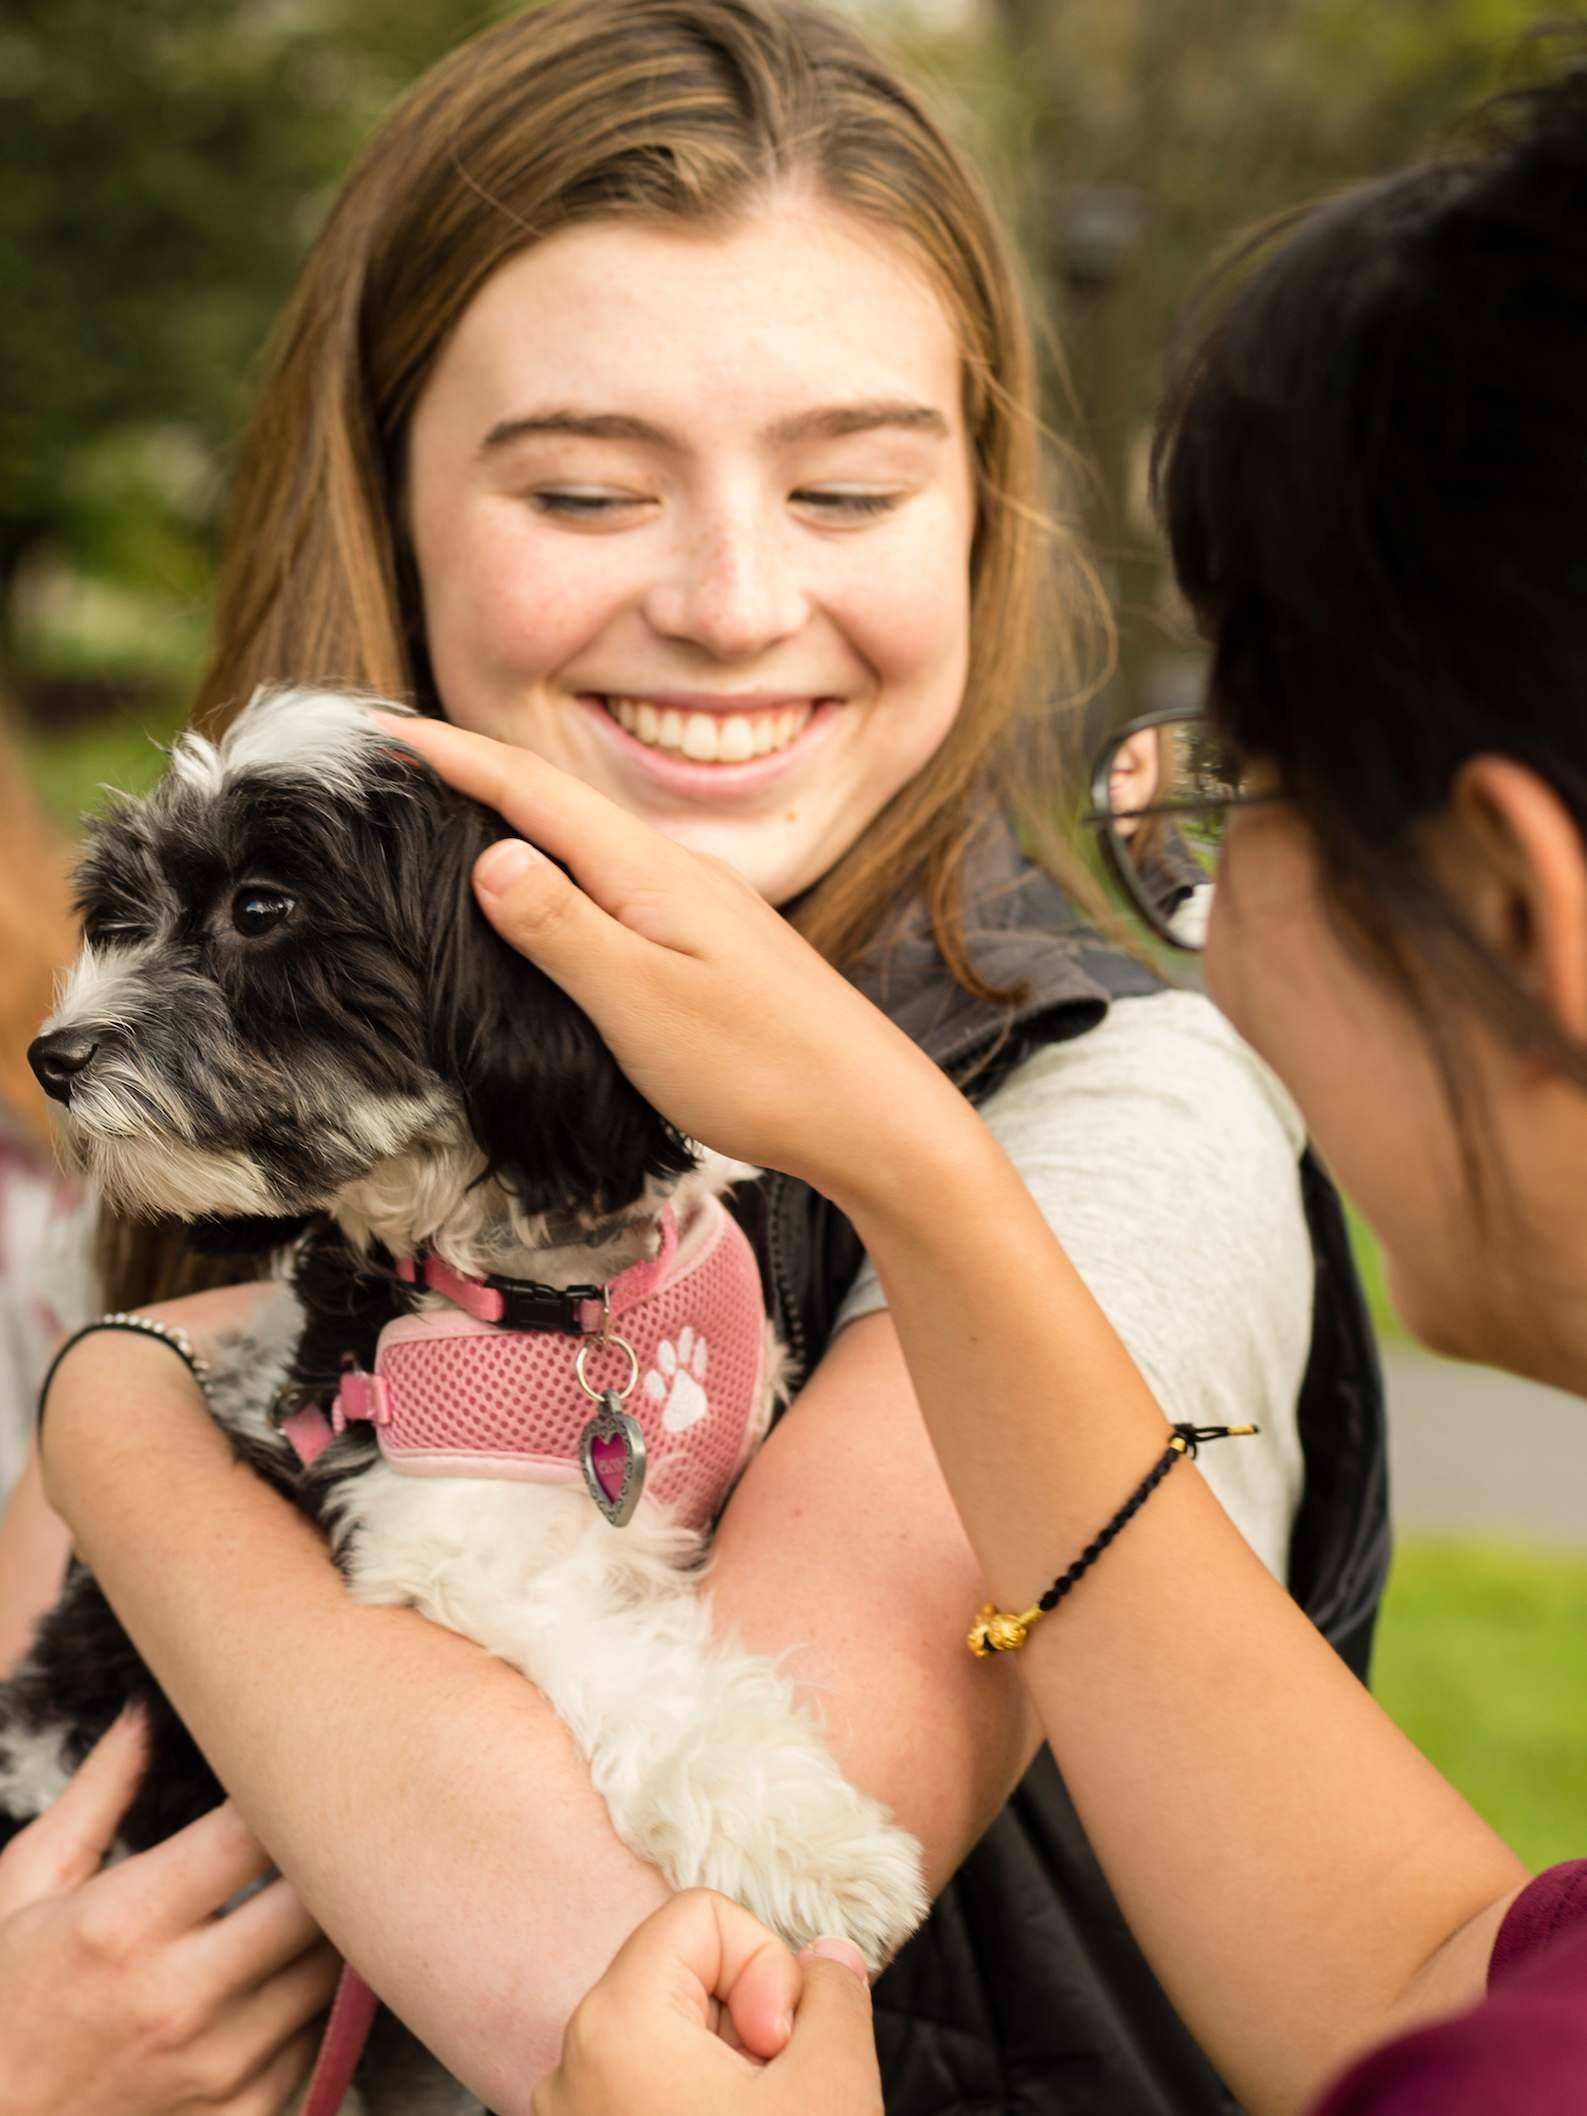 Colgate student with a small dog named Eloise